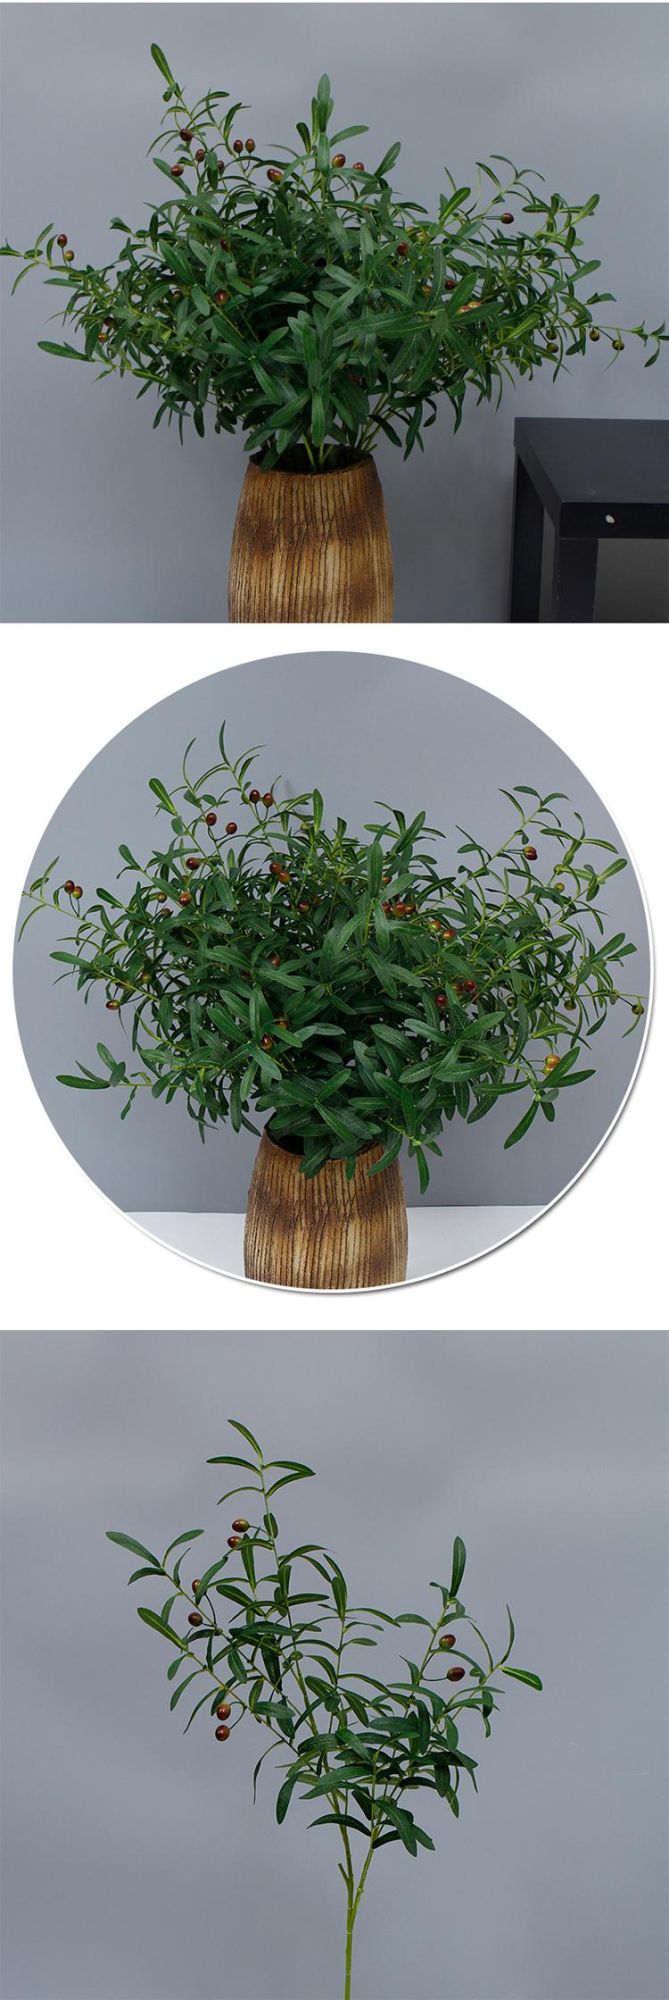 Factory Cheap Wholesale Artificial Olive Leaves for Wedding Decoration